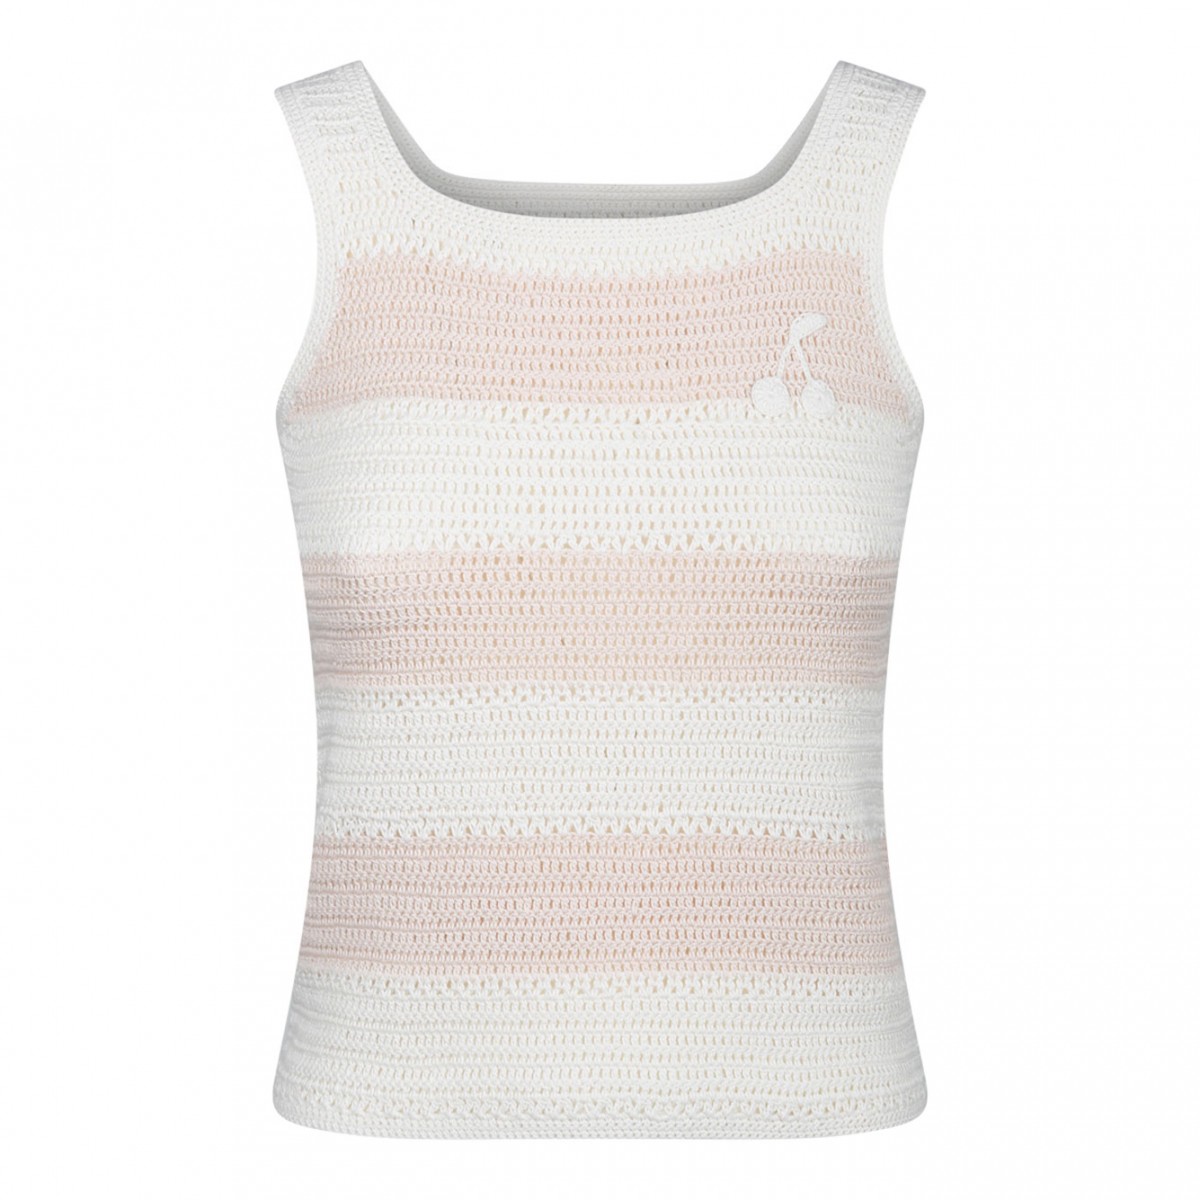 Light Pink and White Crochet Knit Tank Top